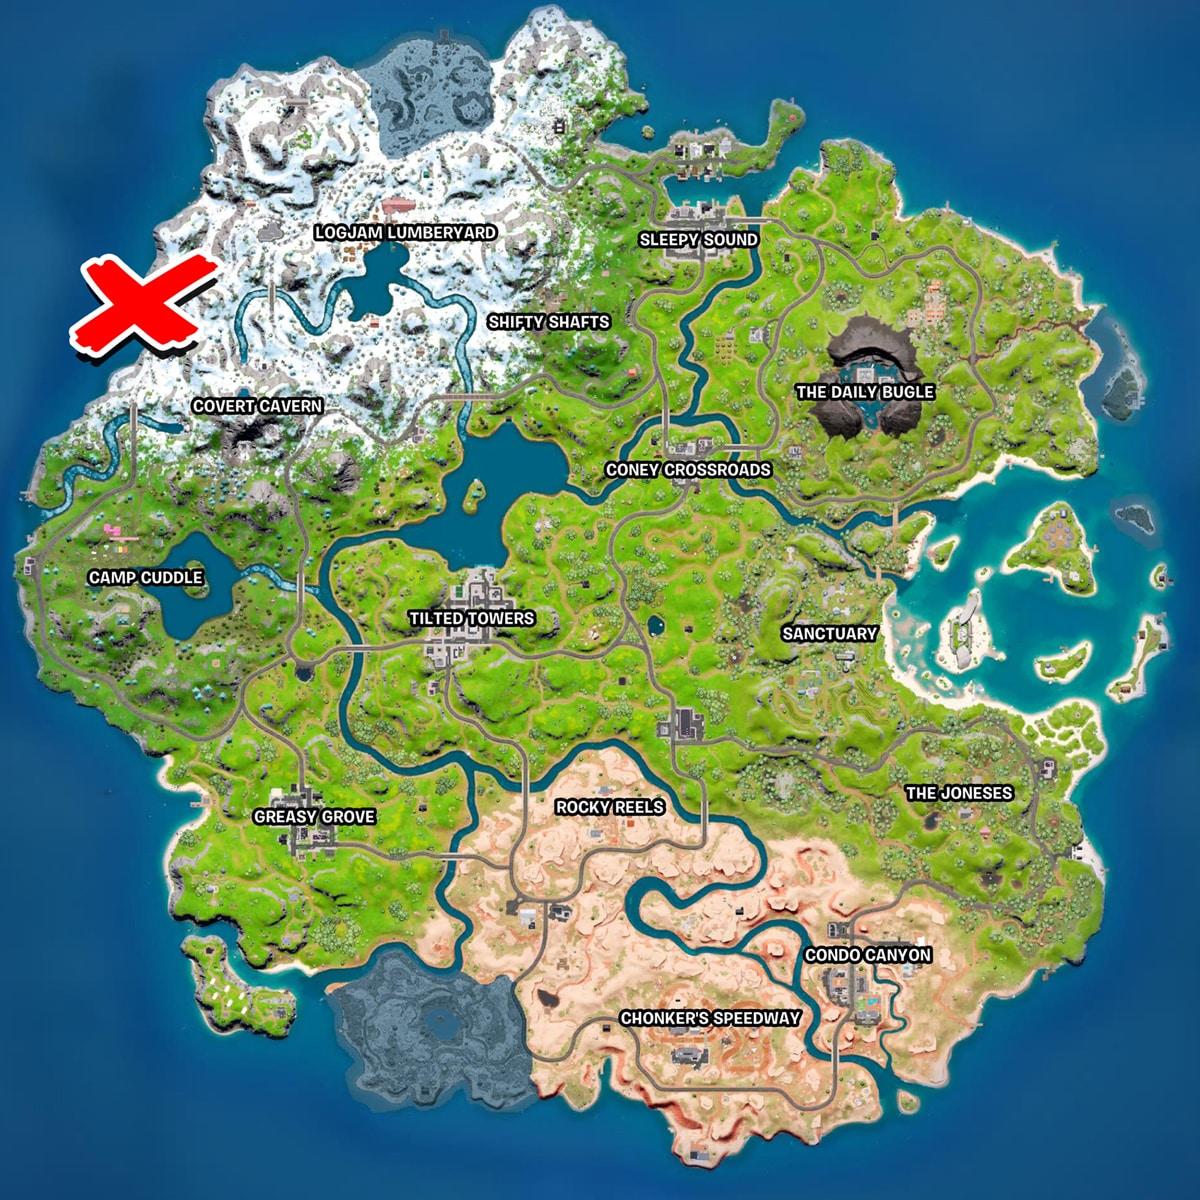 A fortnite map with fishers paradise marked on it